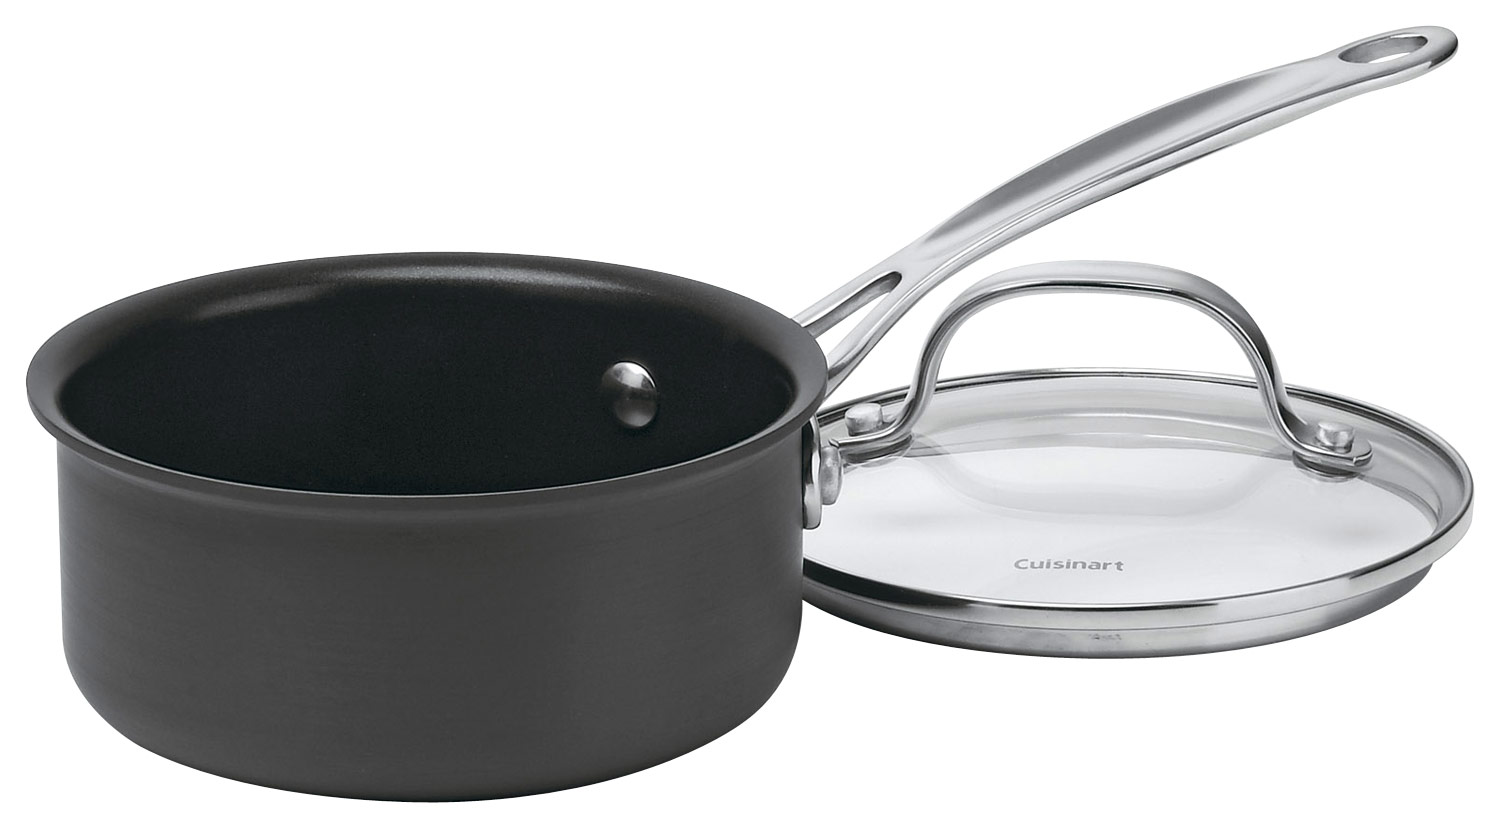 Cuisinart Chef's Classic Stainless Steel Mirror Finish Exterior 1 1/2-Quart Saucepan with Lid, Handle Is Wide and Easy to Grip